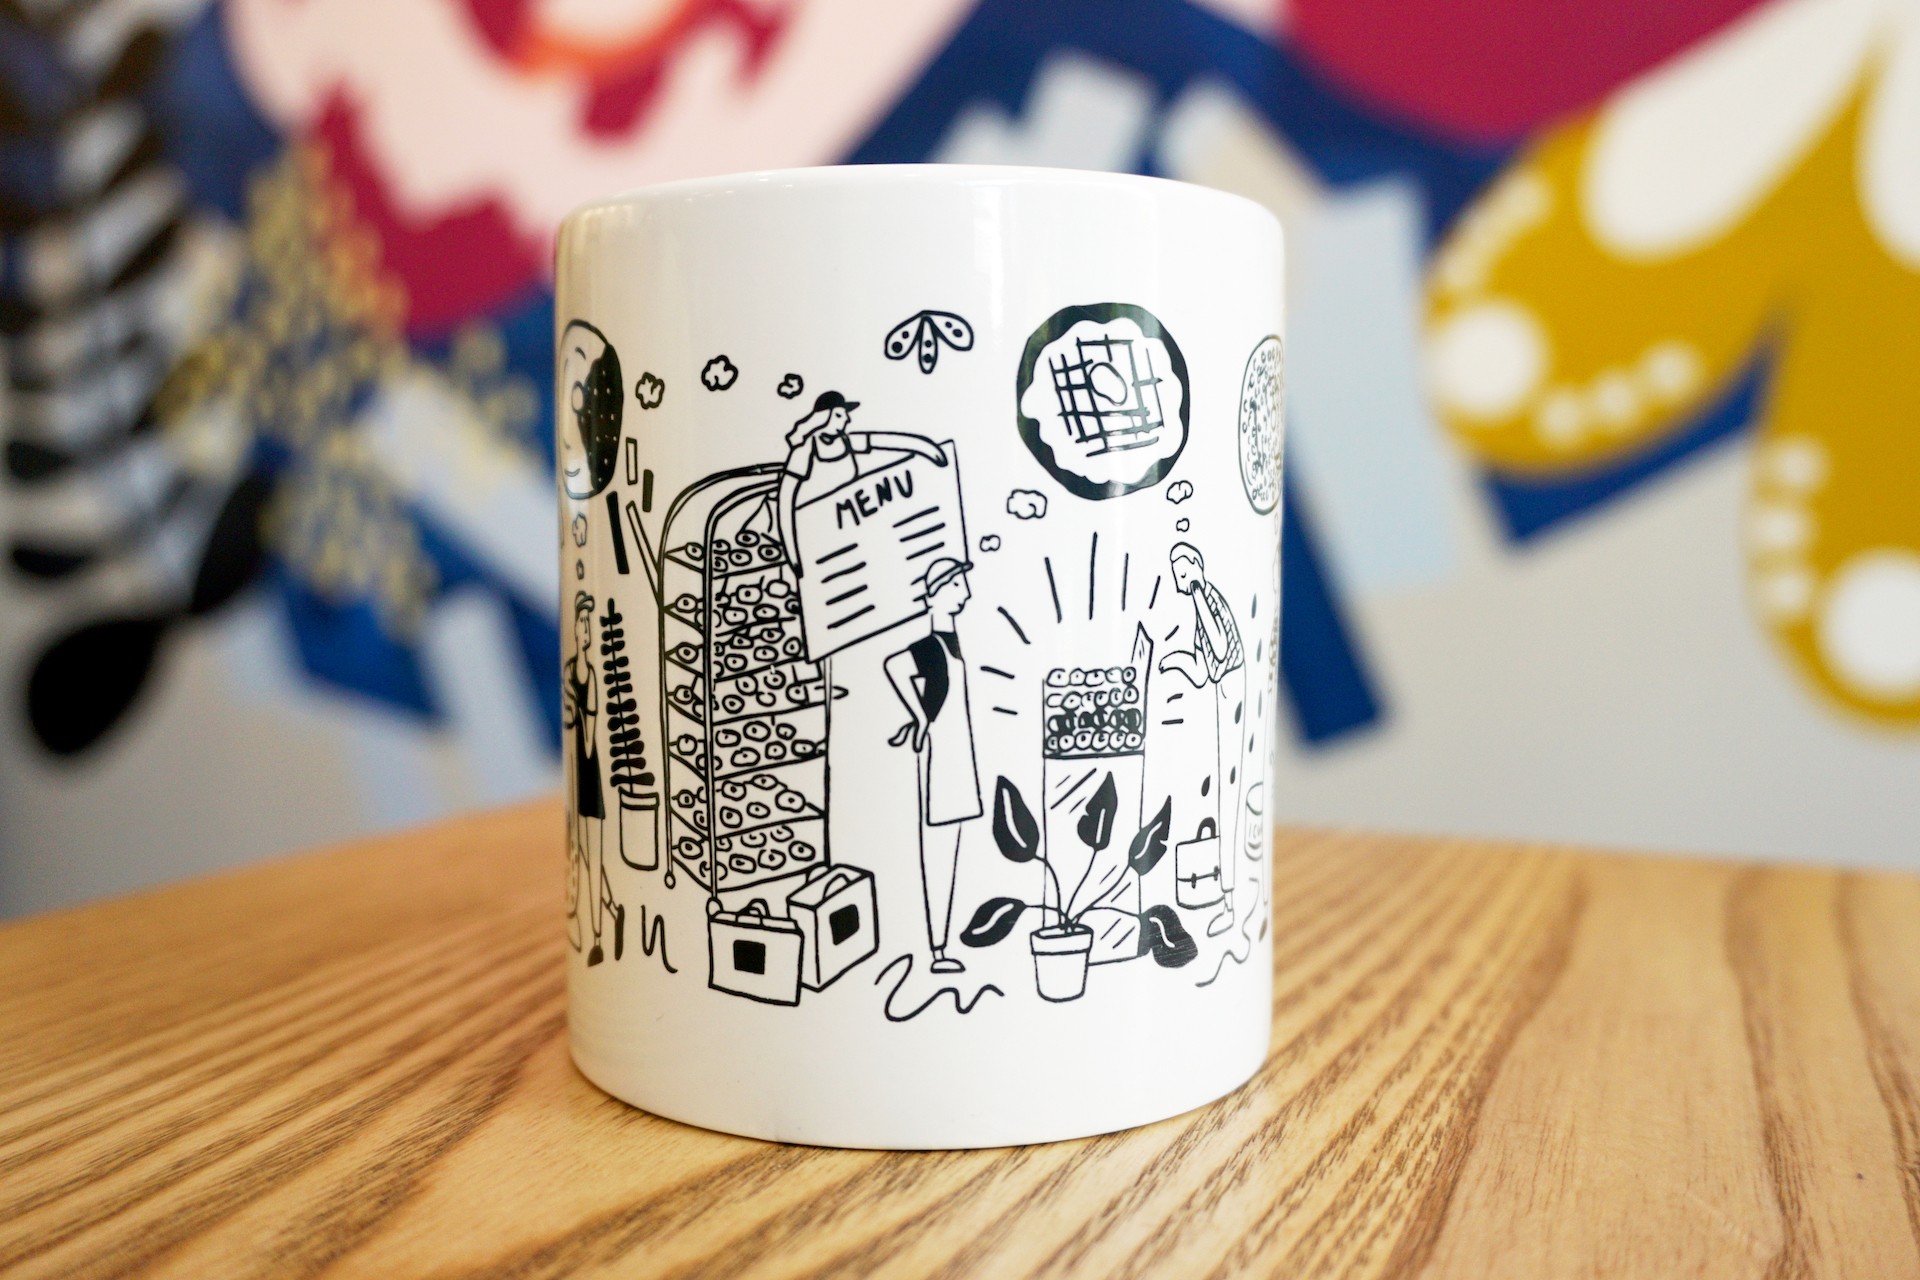 White ceramic mug on wooden table with colorful mural in background. Mug illustration includes oversized kitchen items, donuts and bakers. 